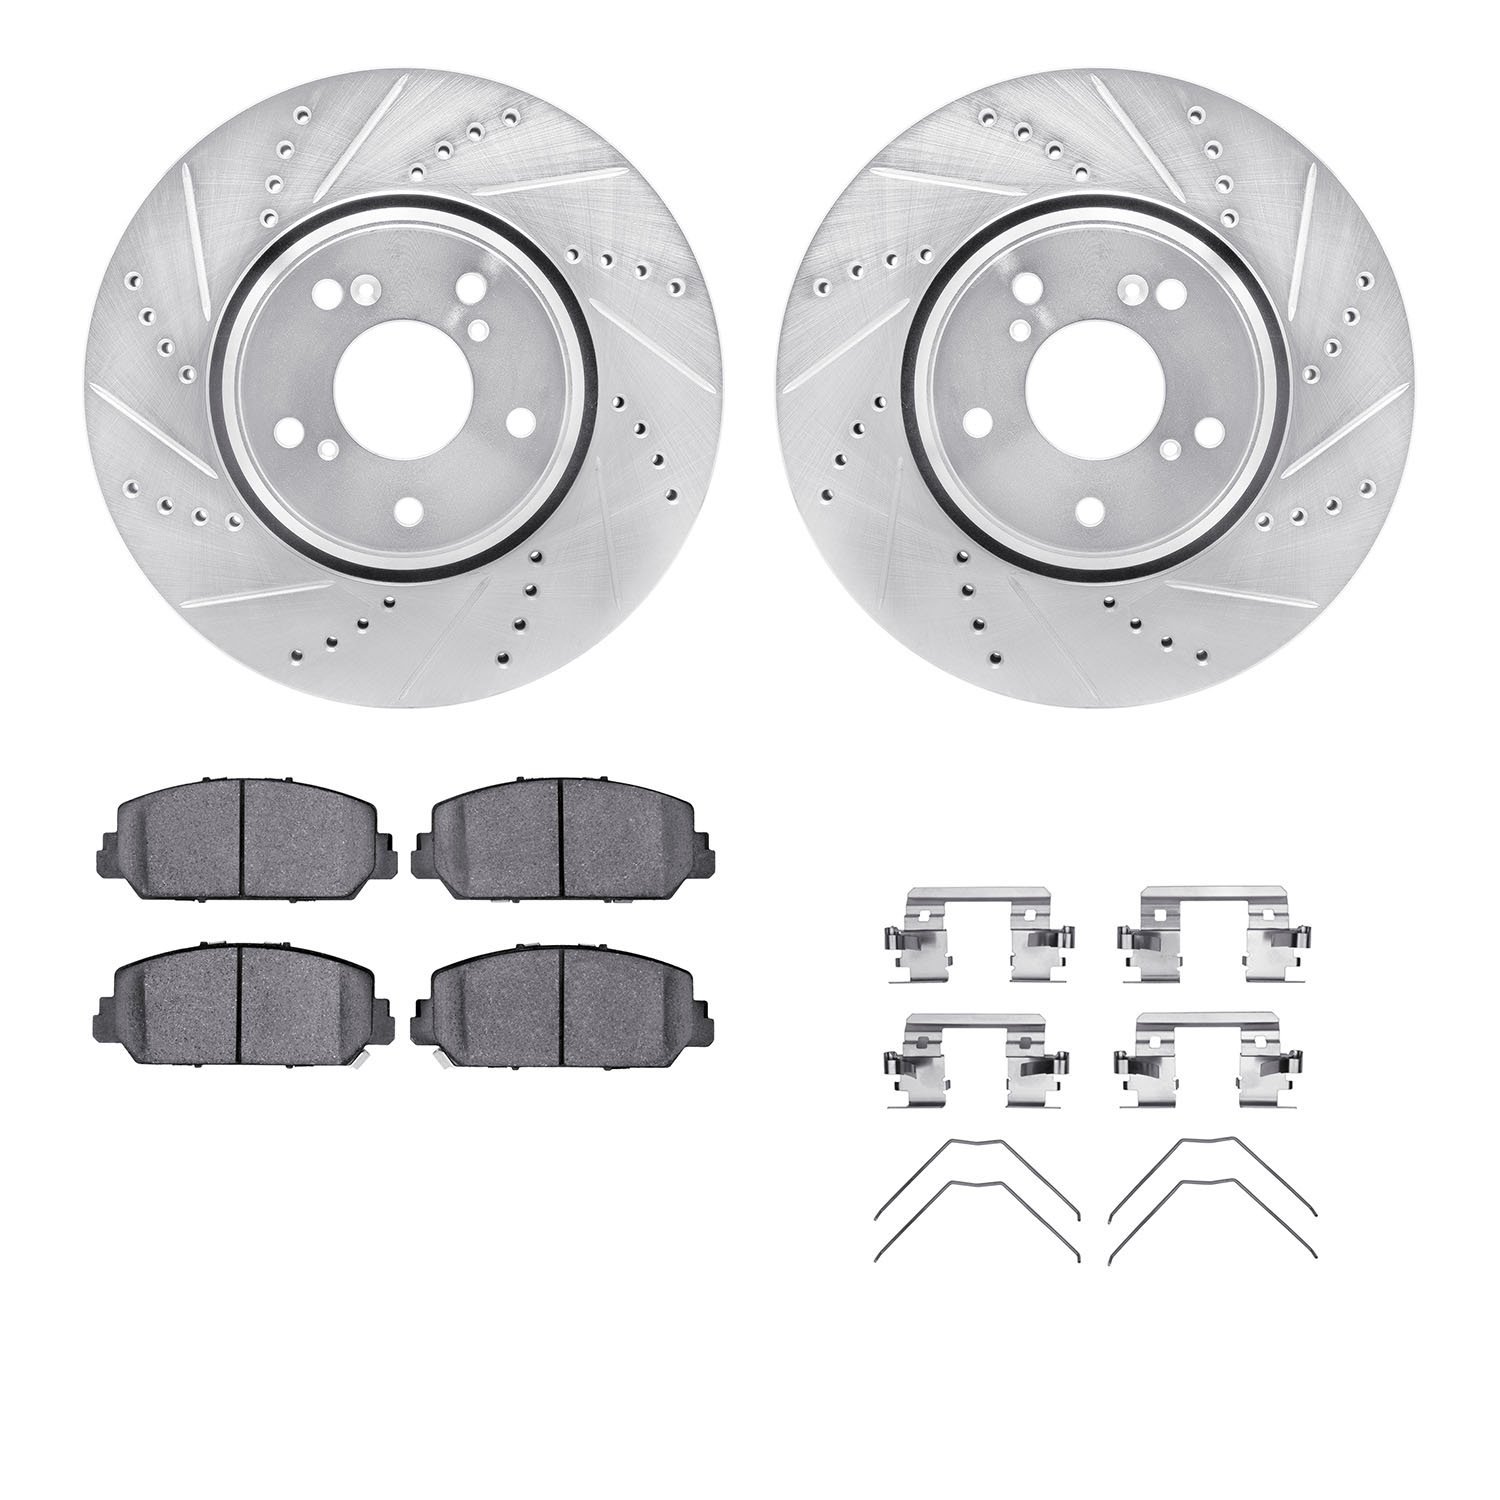 7312-59098 Drilled/Slotted Brake Rotor with 3000-Series Ceramic Brake Pads Kit & Hardware [Silver], Fits Select Acura/Honda, Pos